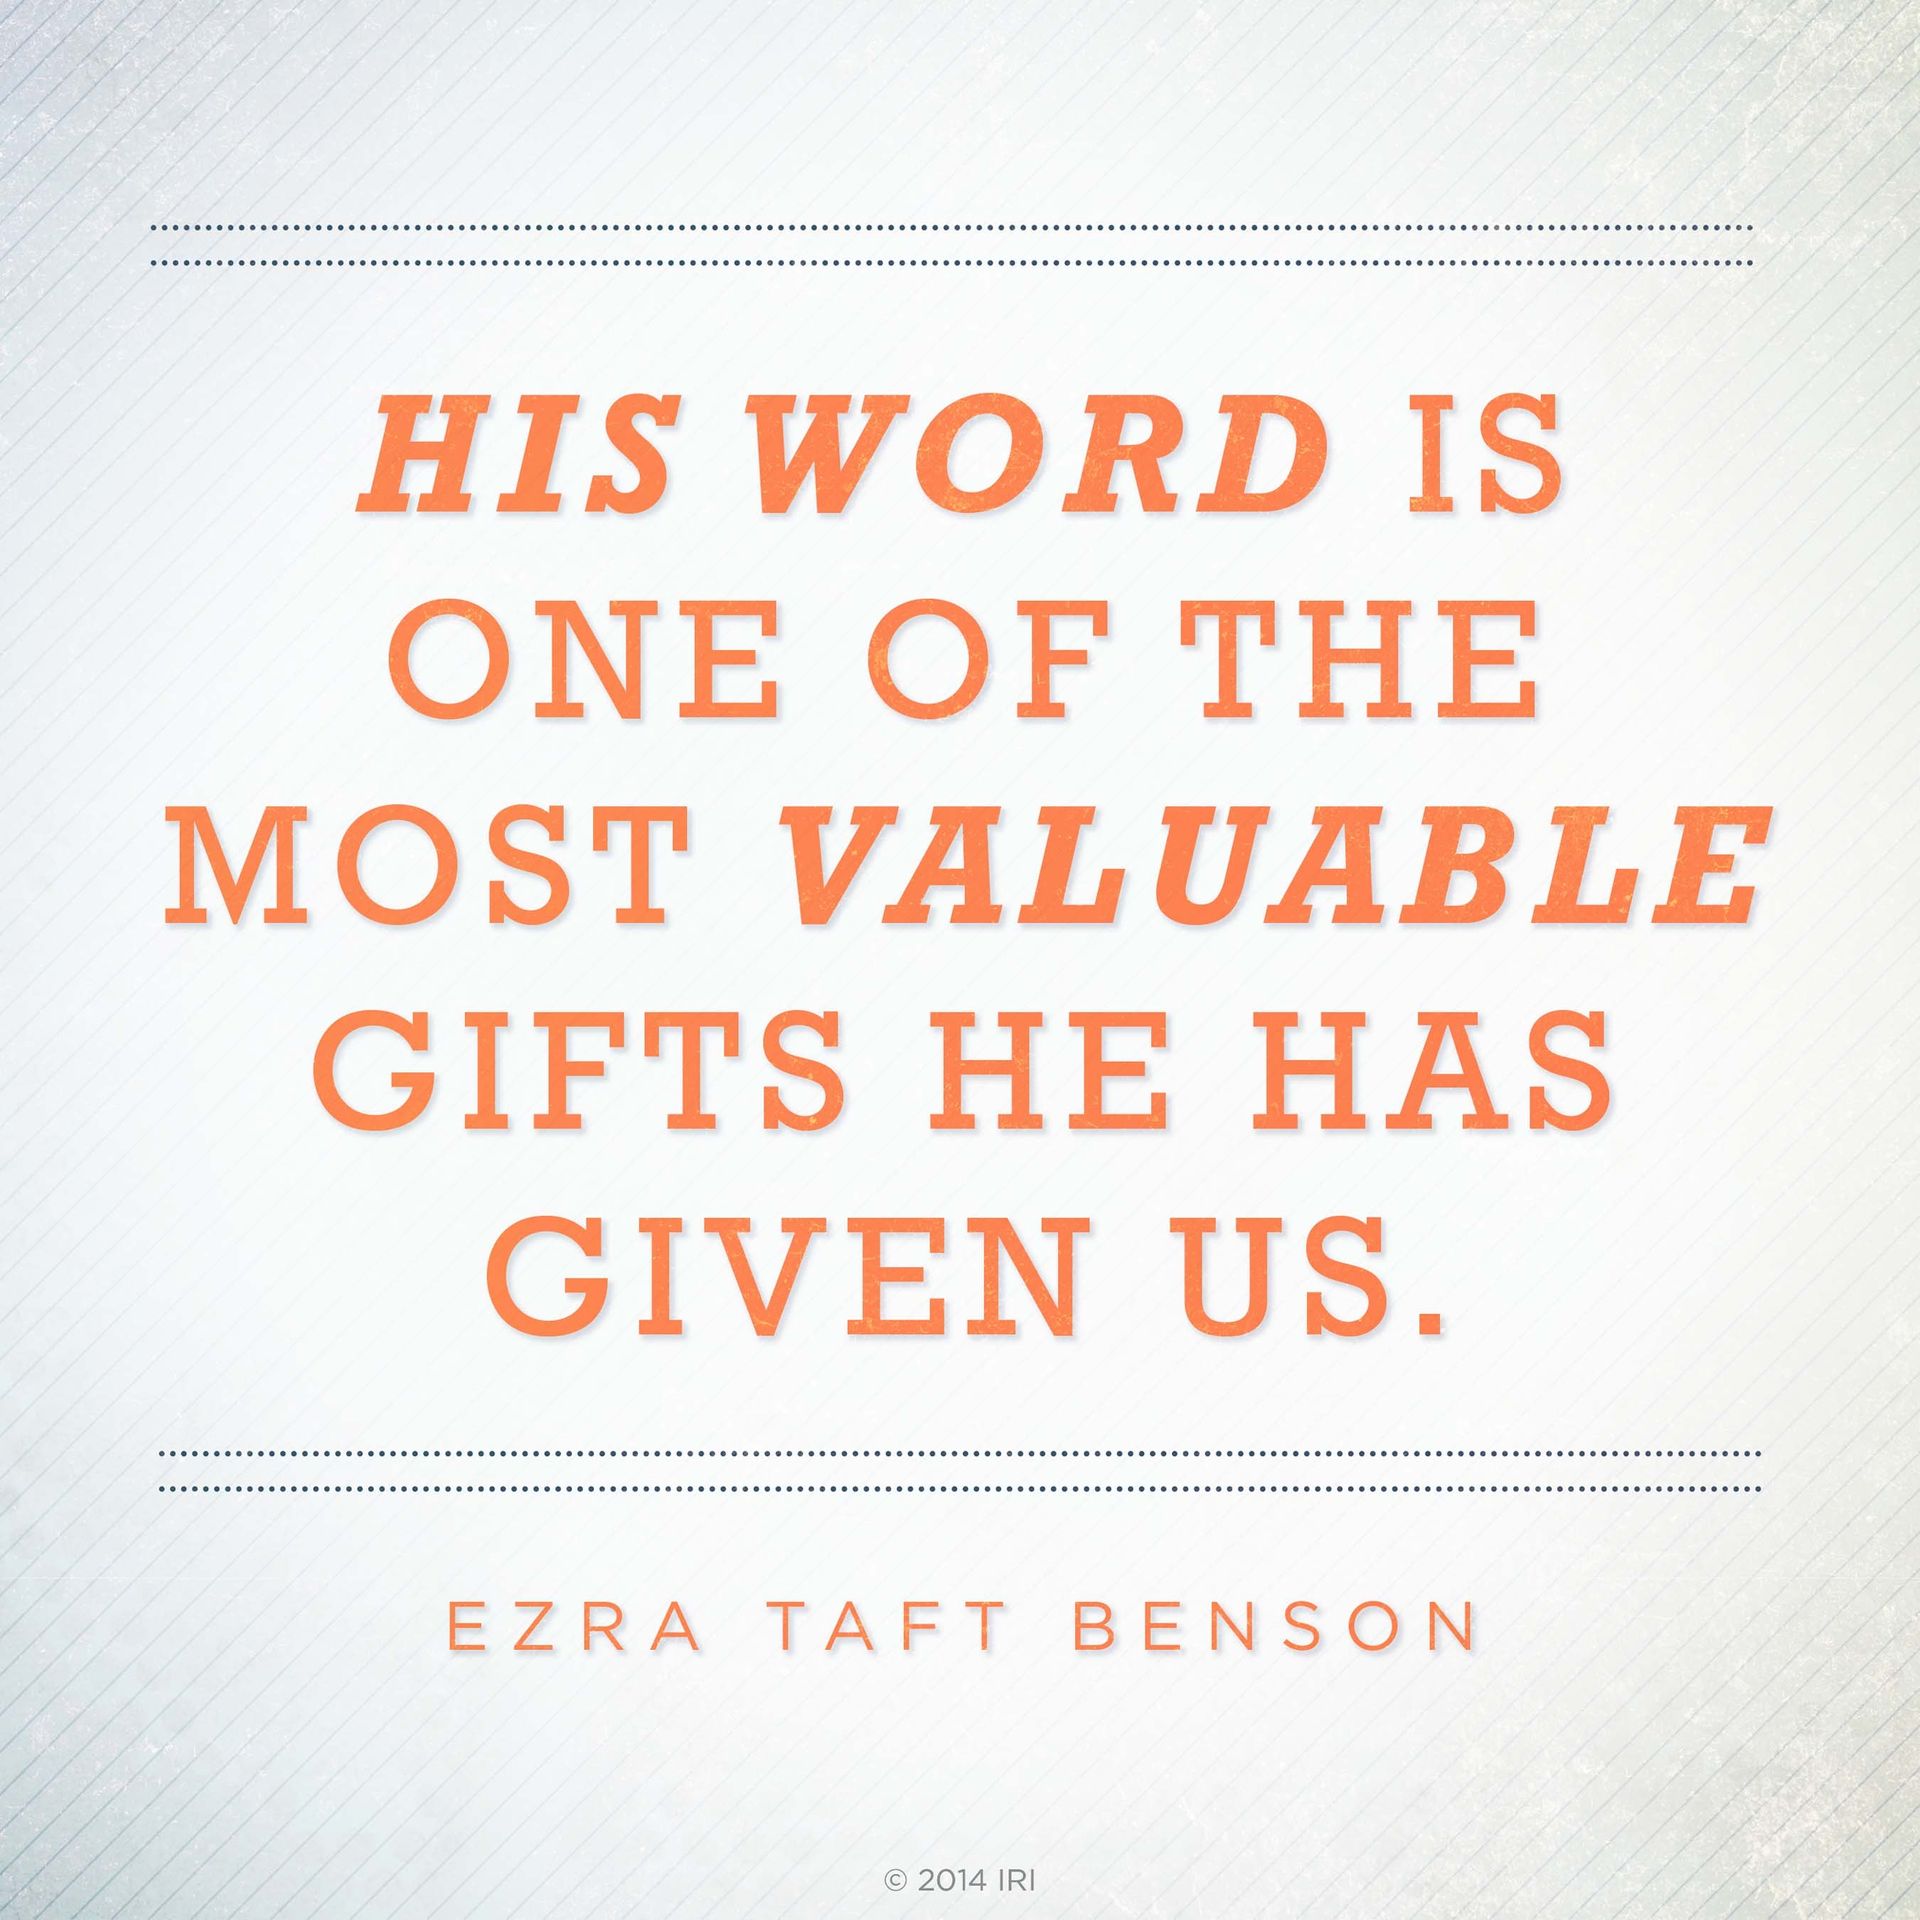 “His word is one of the most valuable gifts He has given us.”—President Ezra Taft Benson, “The Power of the Word”